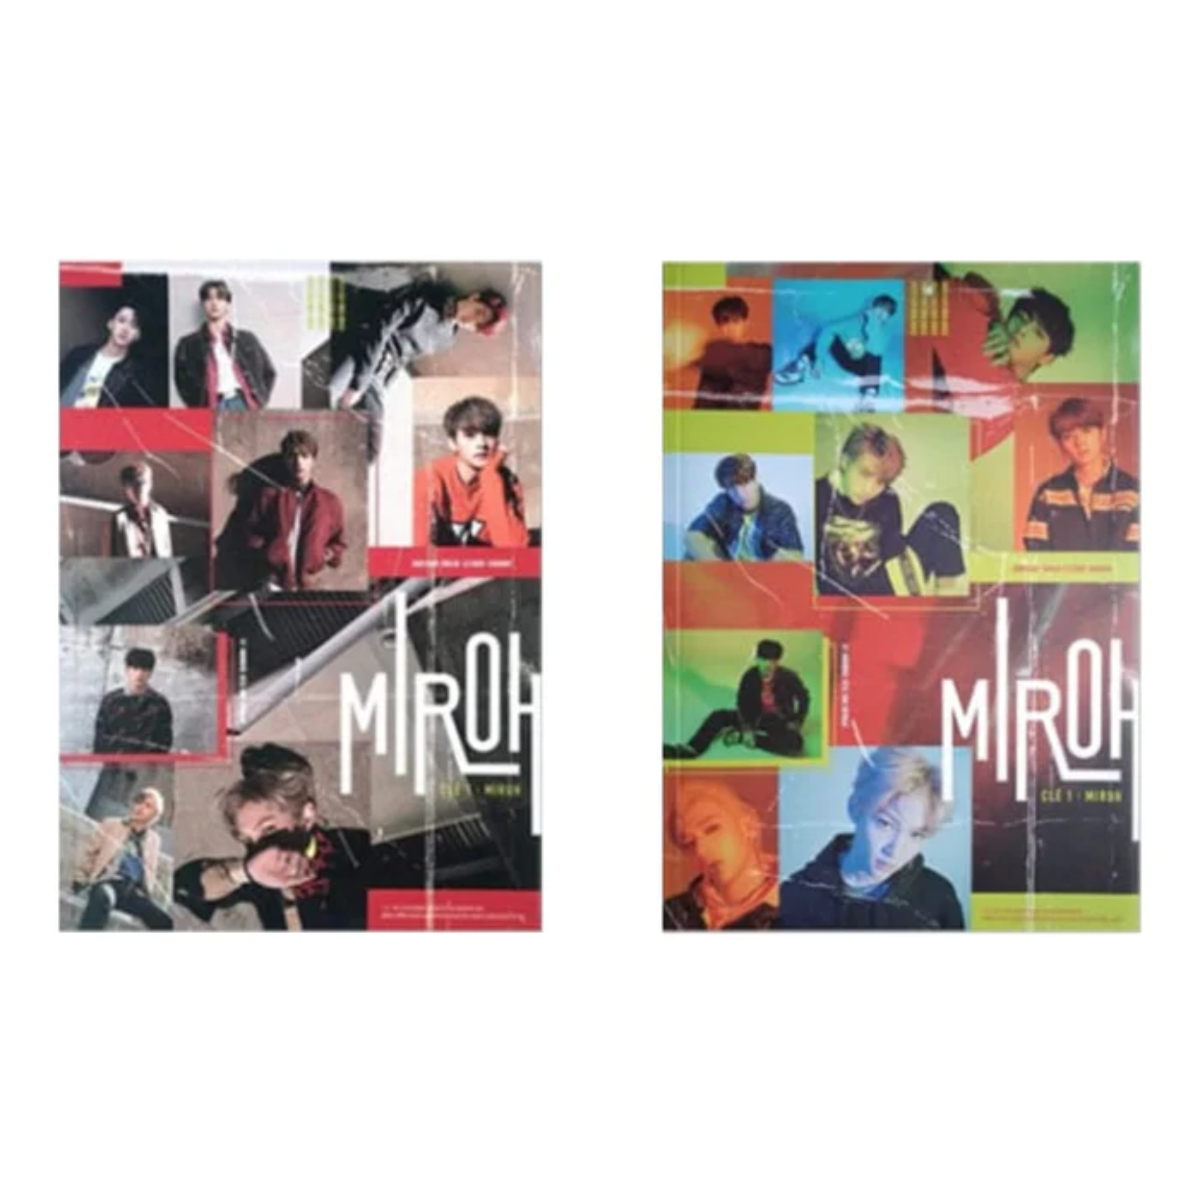 Stray Kids Mini Album - CLE 1 : MIROH (Normal Edition)